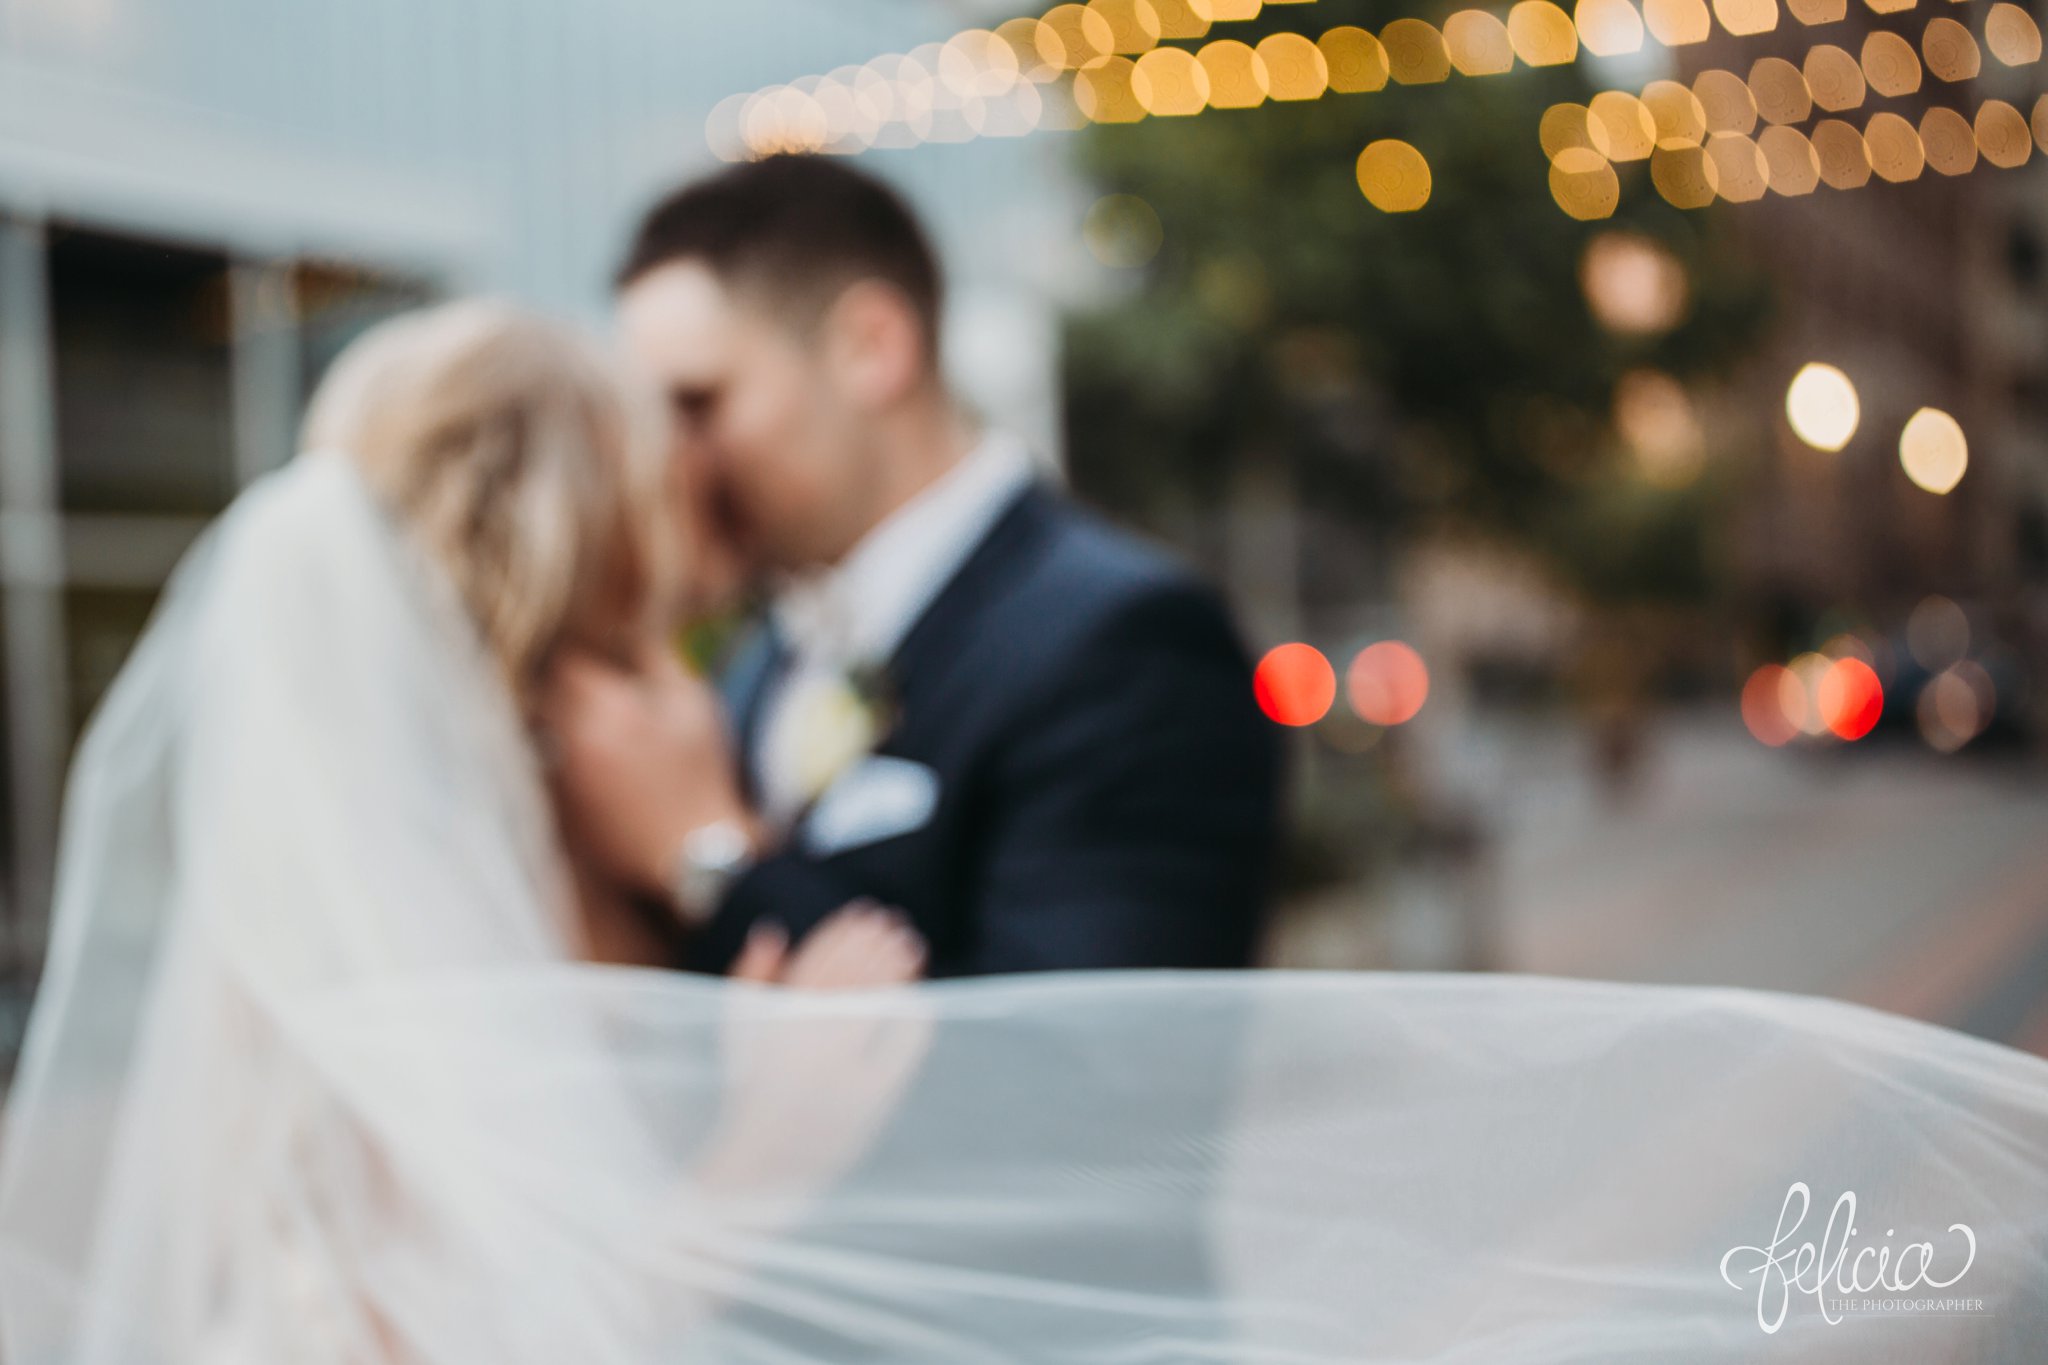 images by feliciathephotographer.com | wedding photographer | downtown kansas city | bride and groom portrait | out of focus | flowing veil | kiss | true love | string lights | romantic | glamorous | 